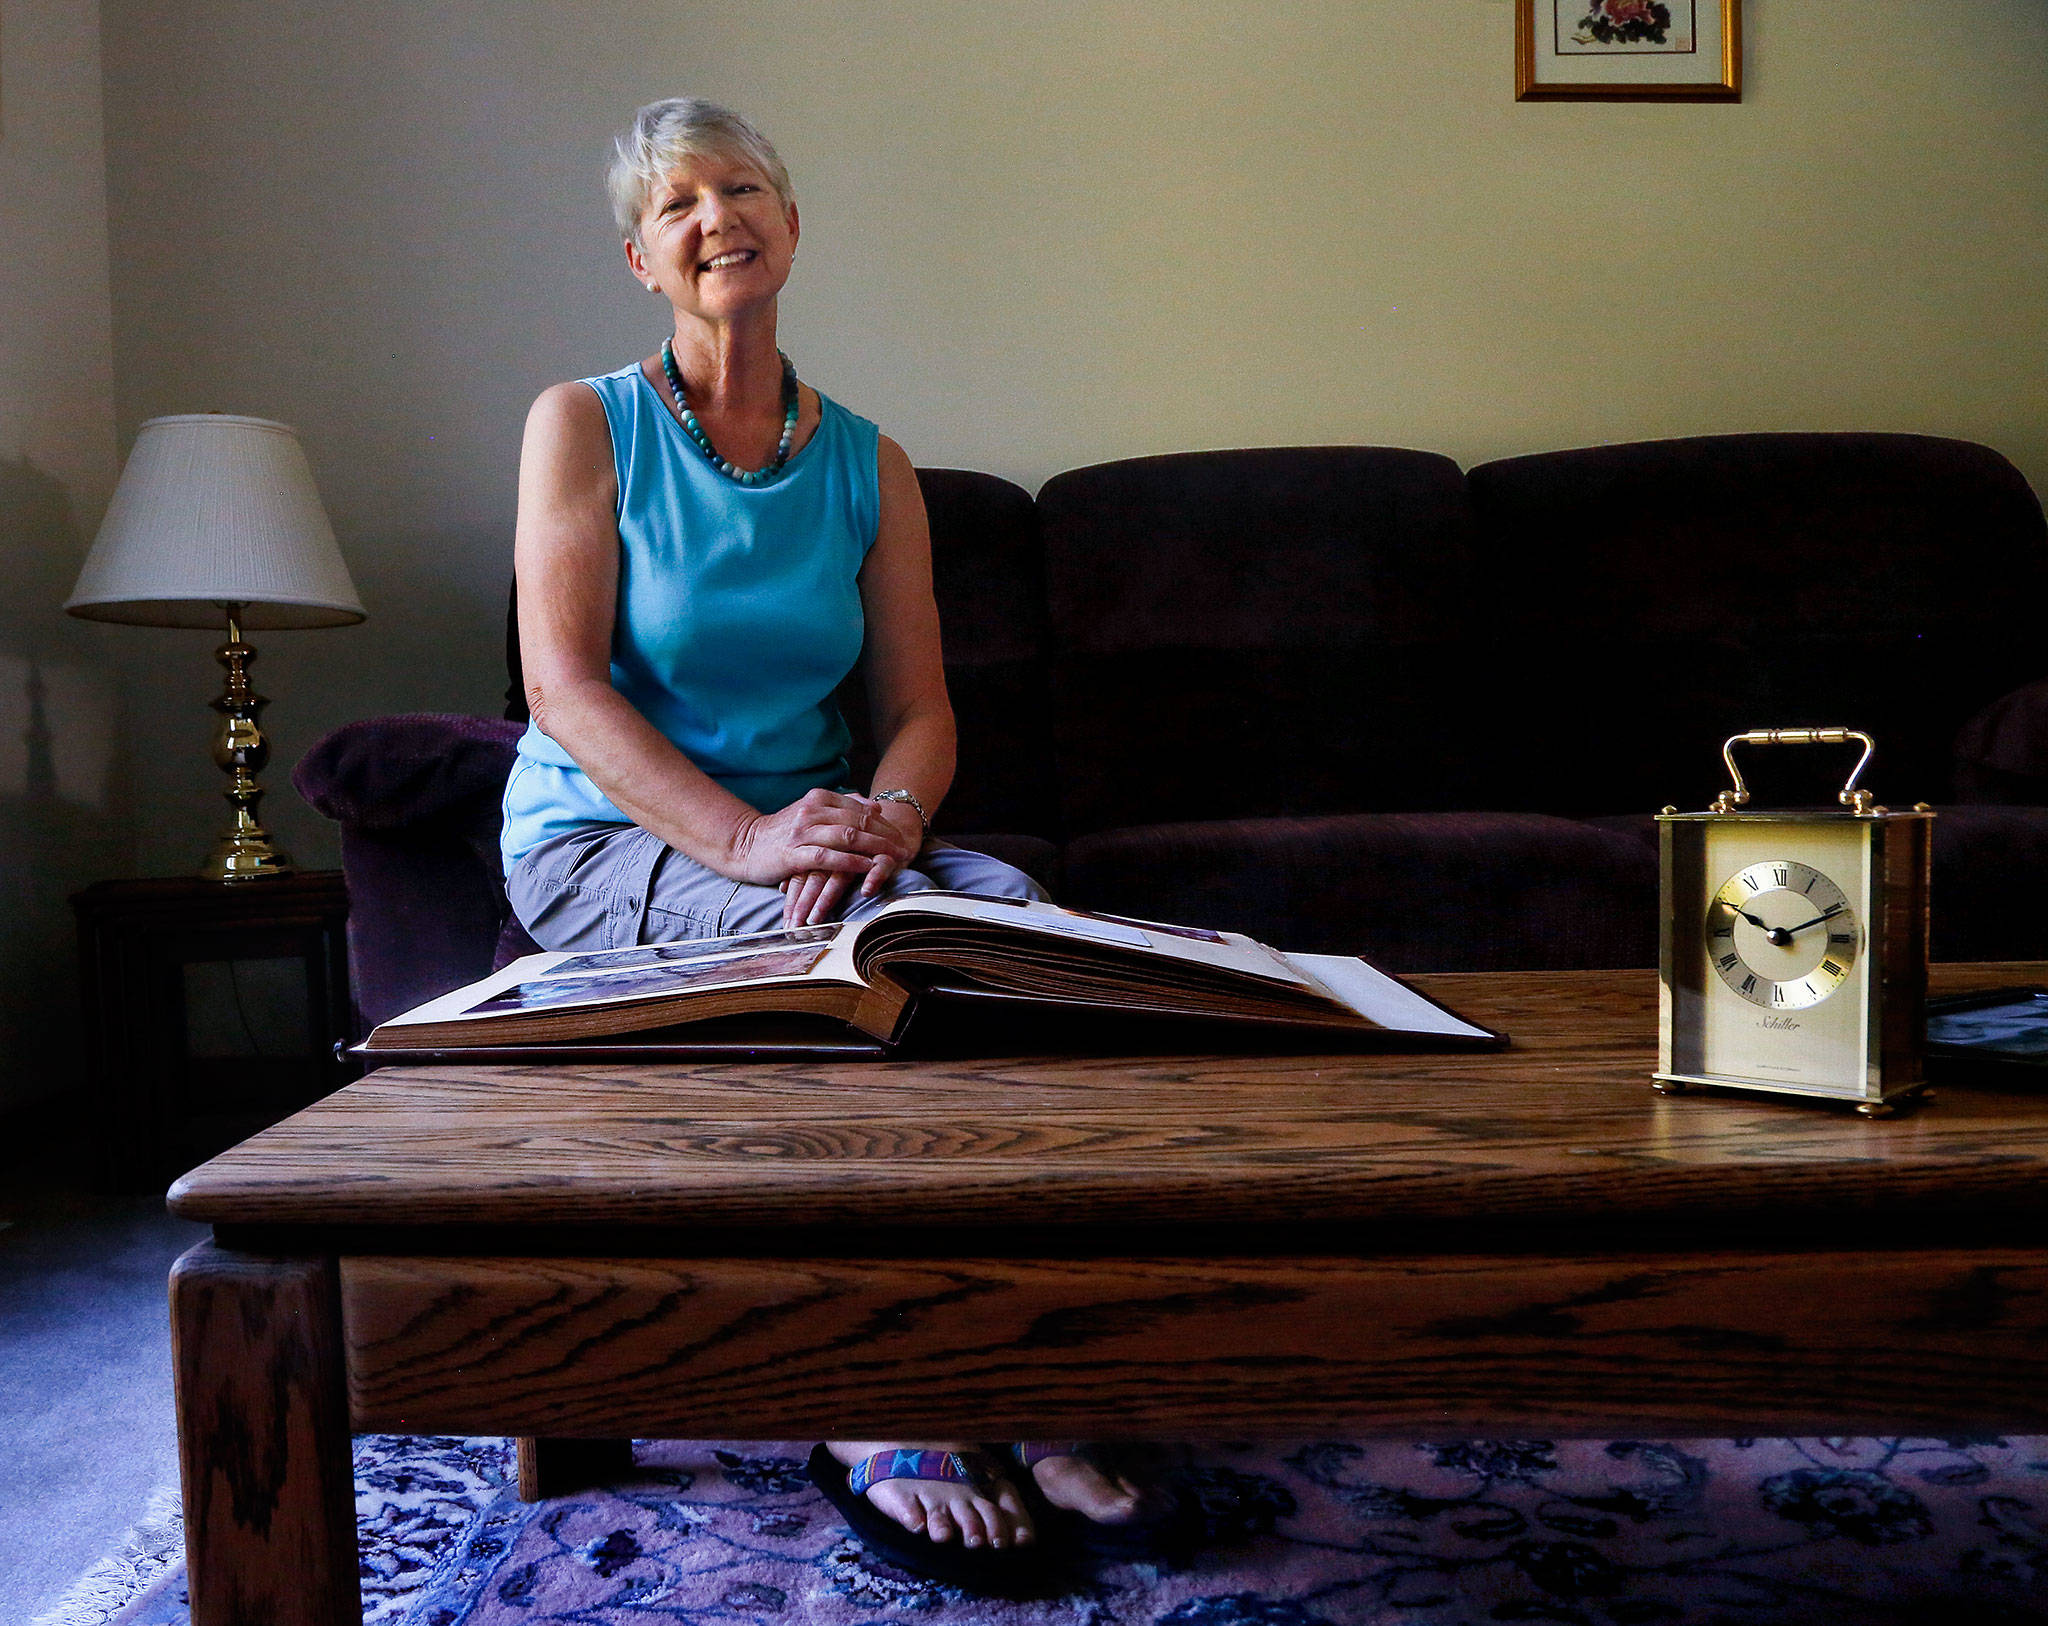 Snohomish’s Janette Huskie, who worked two years as a Buckingham Palace housemaid and met the future Princess Diana, gets out her scrapbook of memories and talks about Saturday’s royal wedding. (Dan Bates / The Herald)